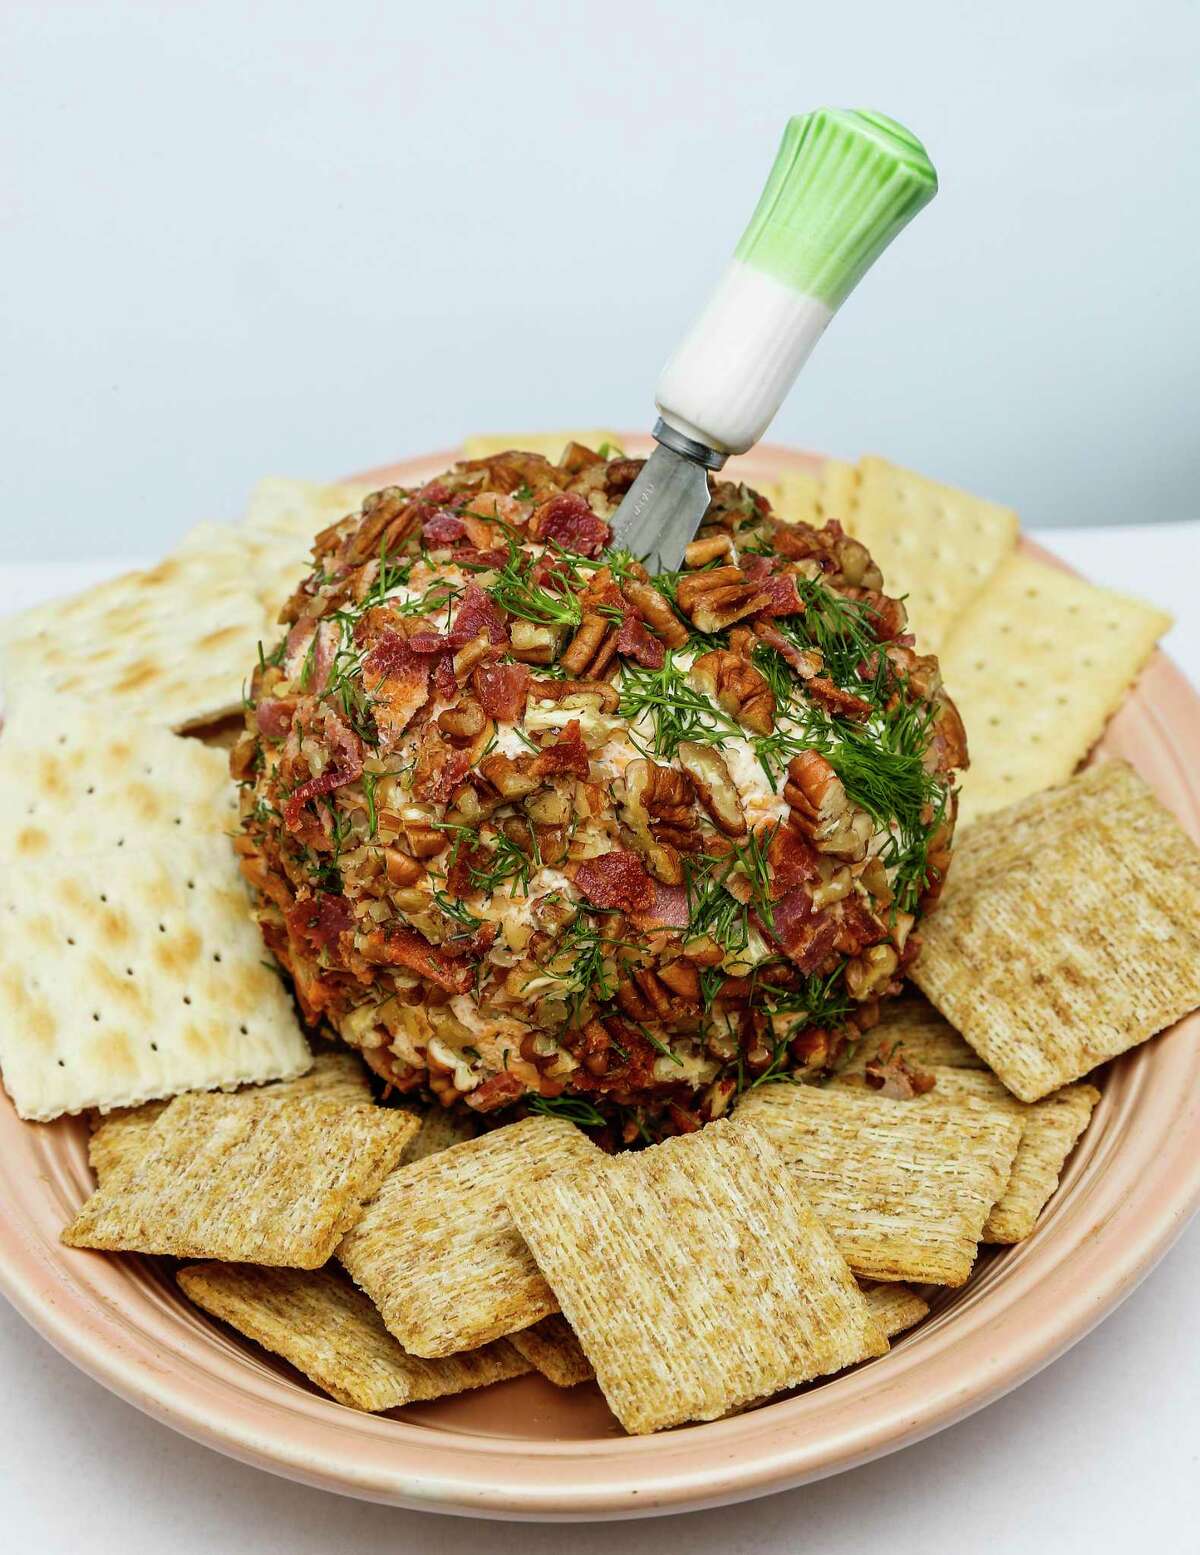 Dill Pickle Cheese Ball employs both pickle juice and chopped dill pickles.